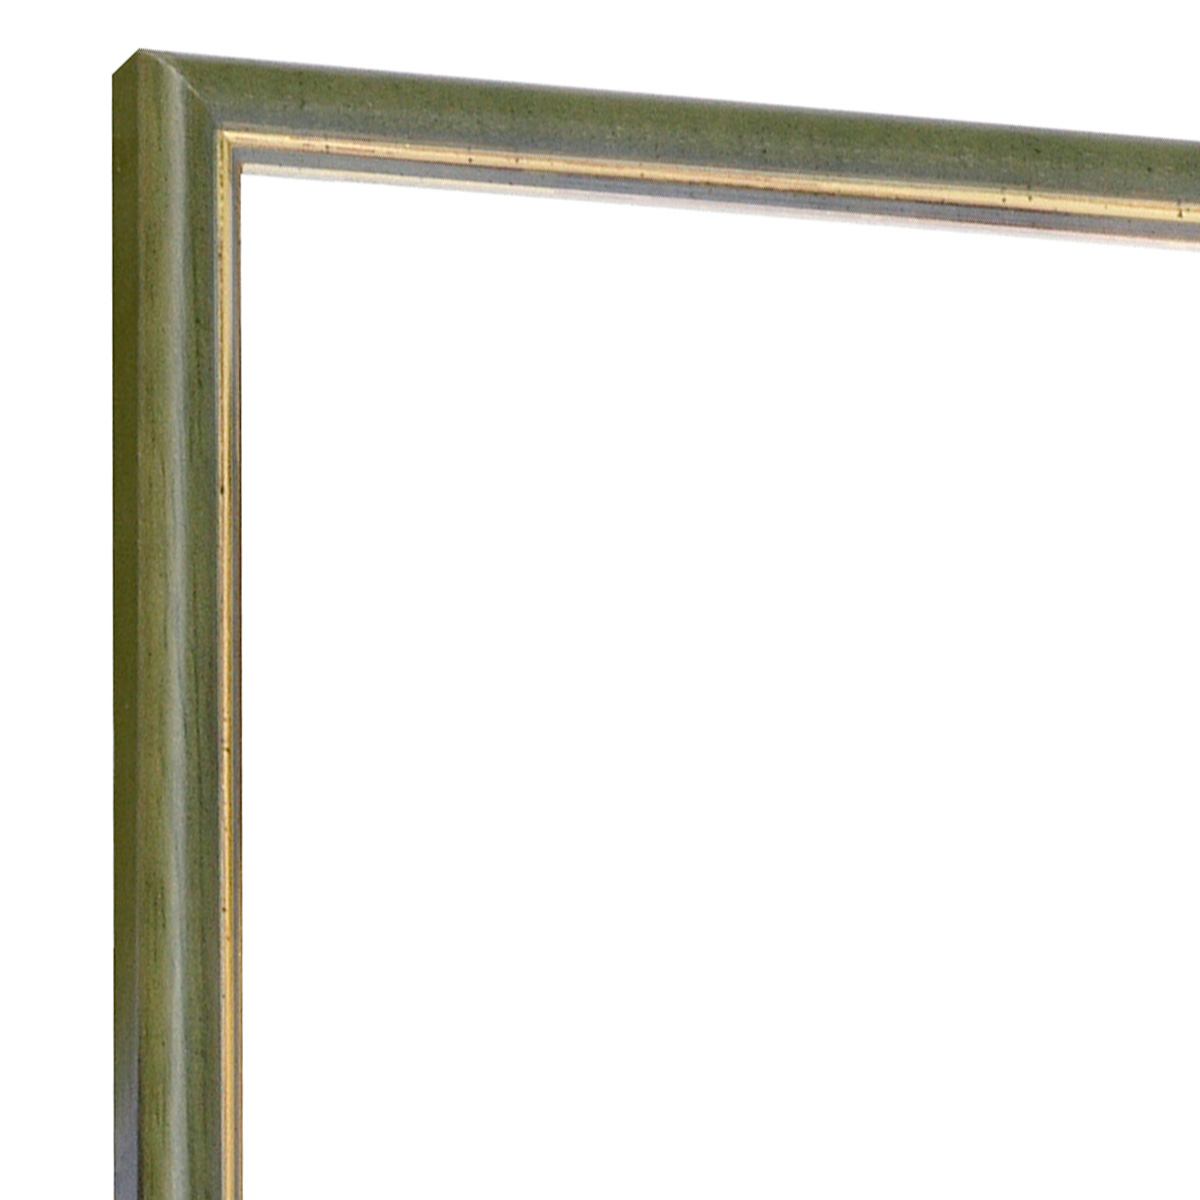 Moulding ayous jointed 13mm - green with golden edge - Corner